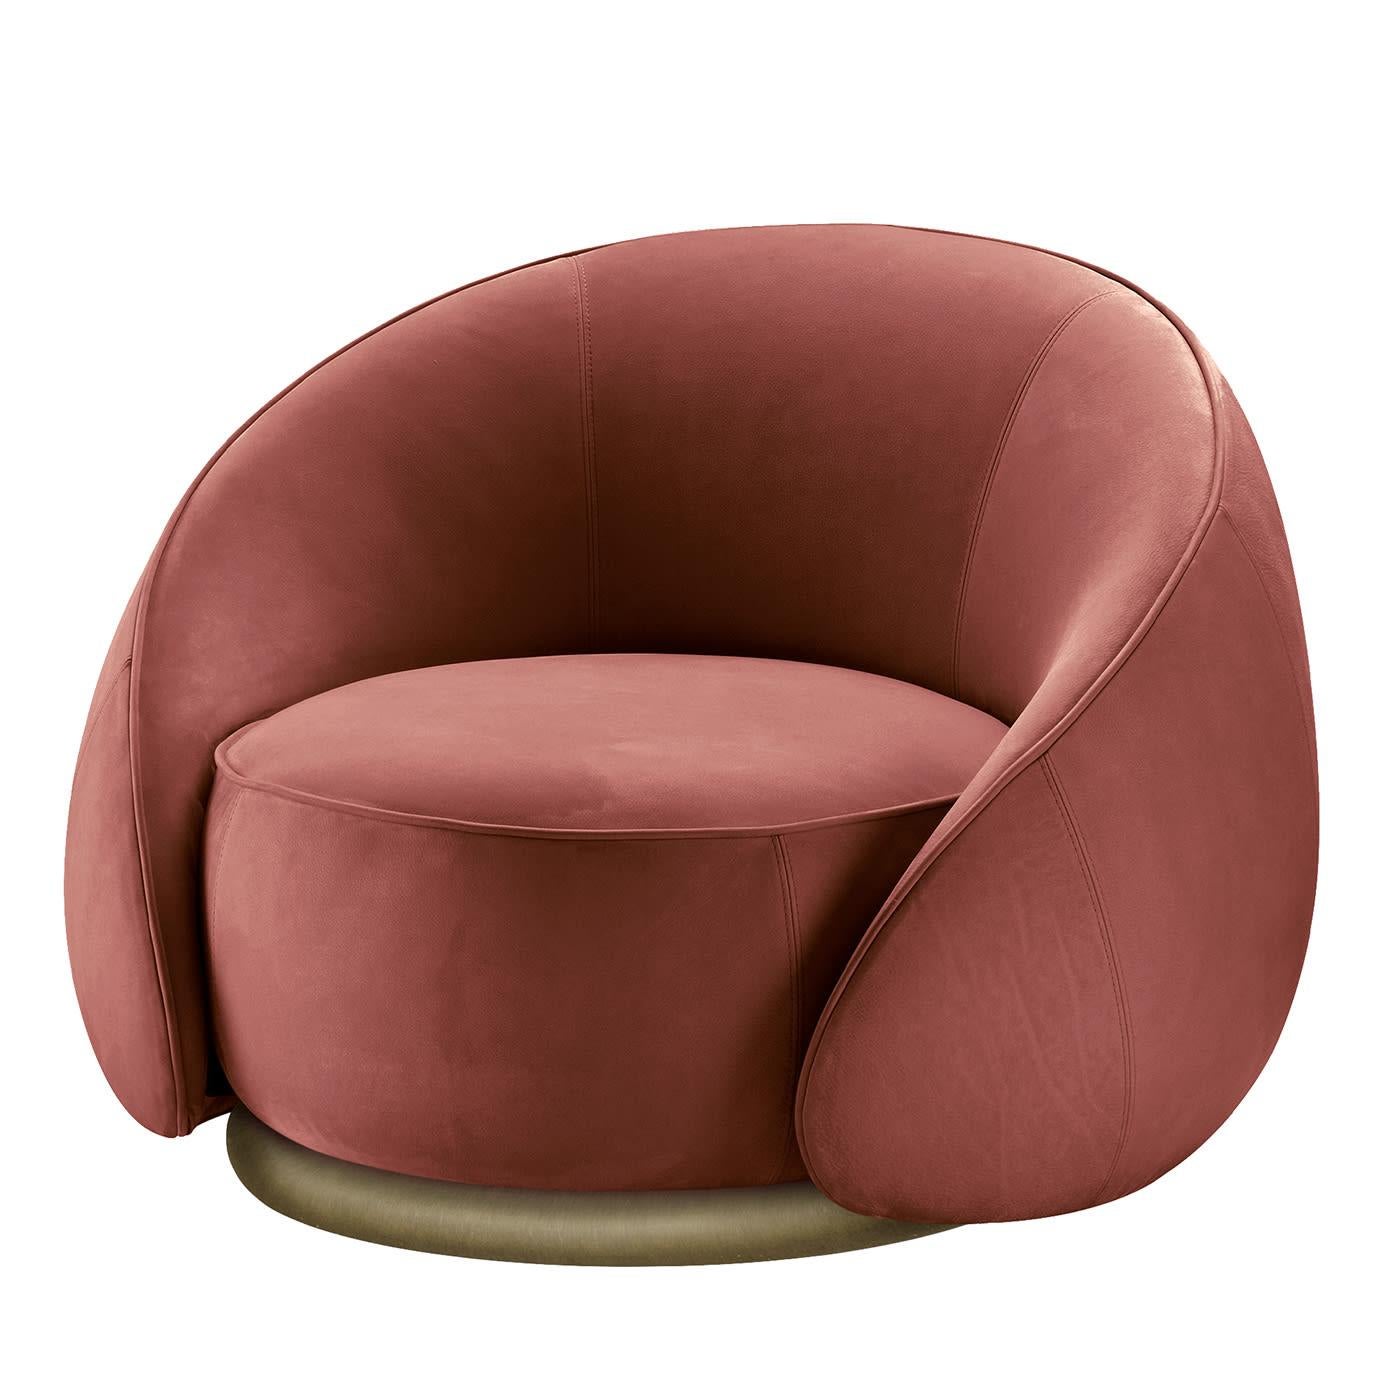 The comforting feeling of an hug inspired the enveloping silhouette of this plush armchair, marked by a curved shell with sloping sides that shares with the cylindrical seat the same plump padding. Luxuriously covered in red-hued leather for a